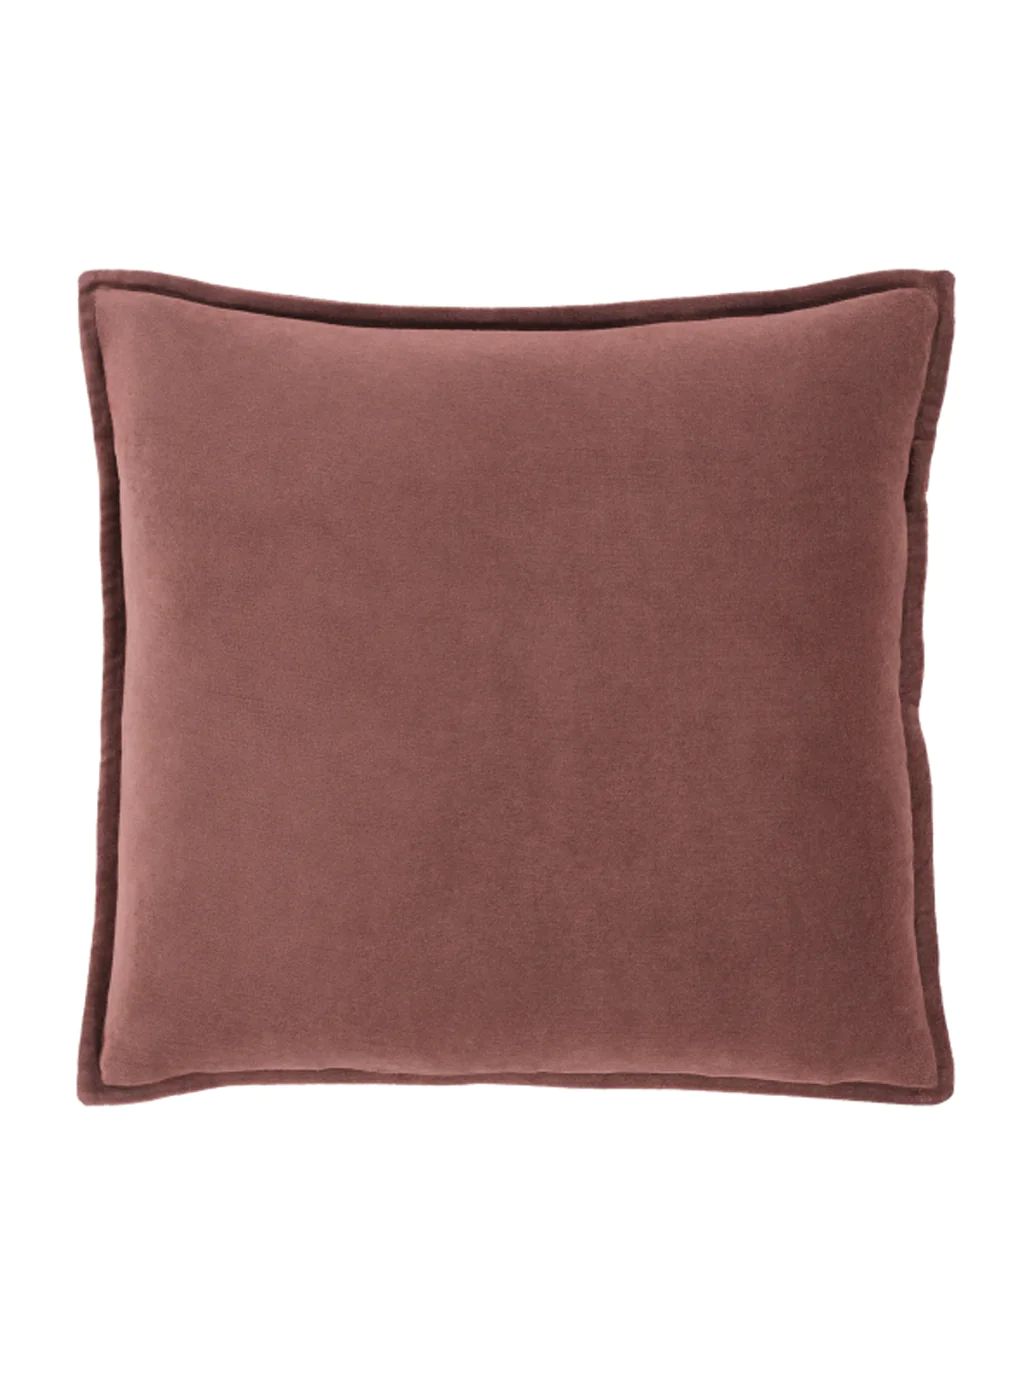 Libby Pillow | House of Jade Home